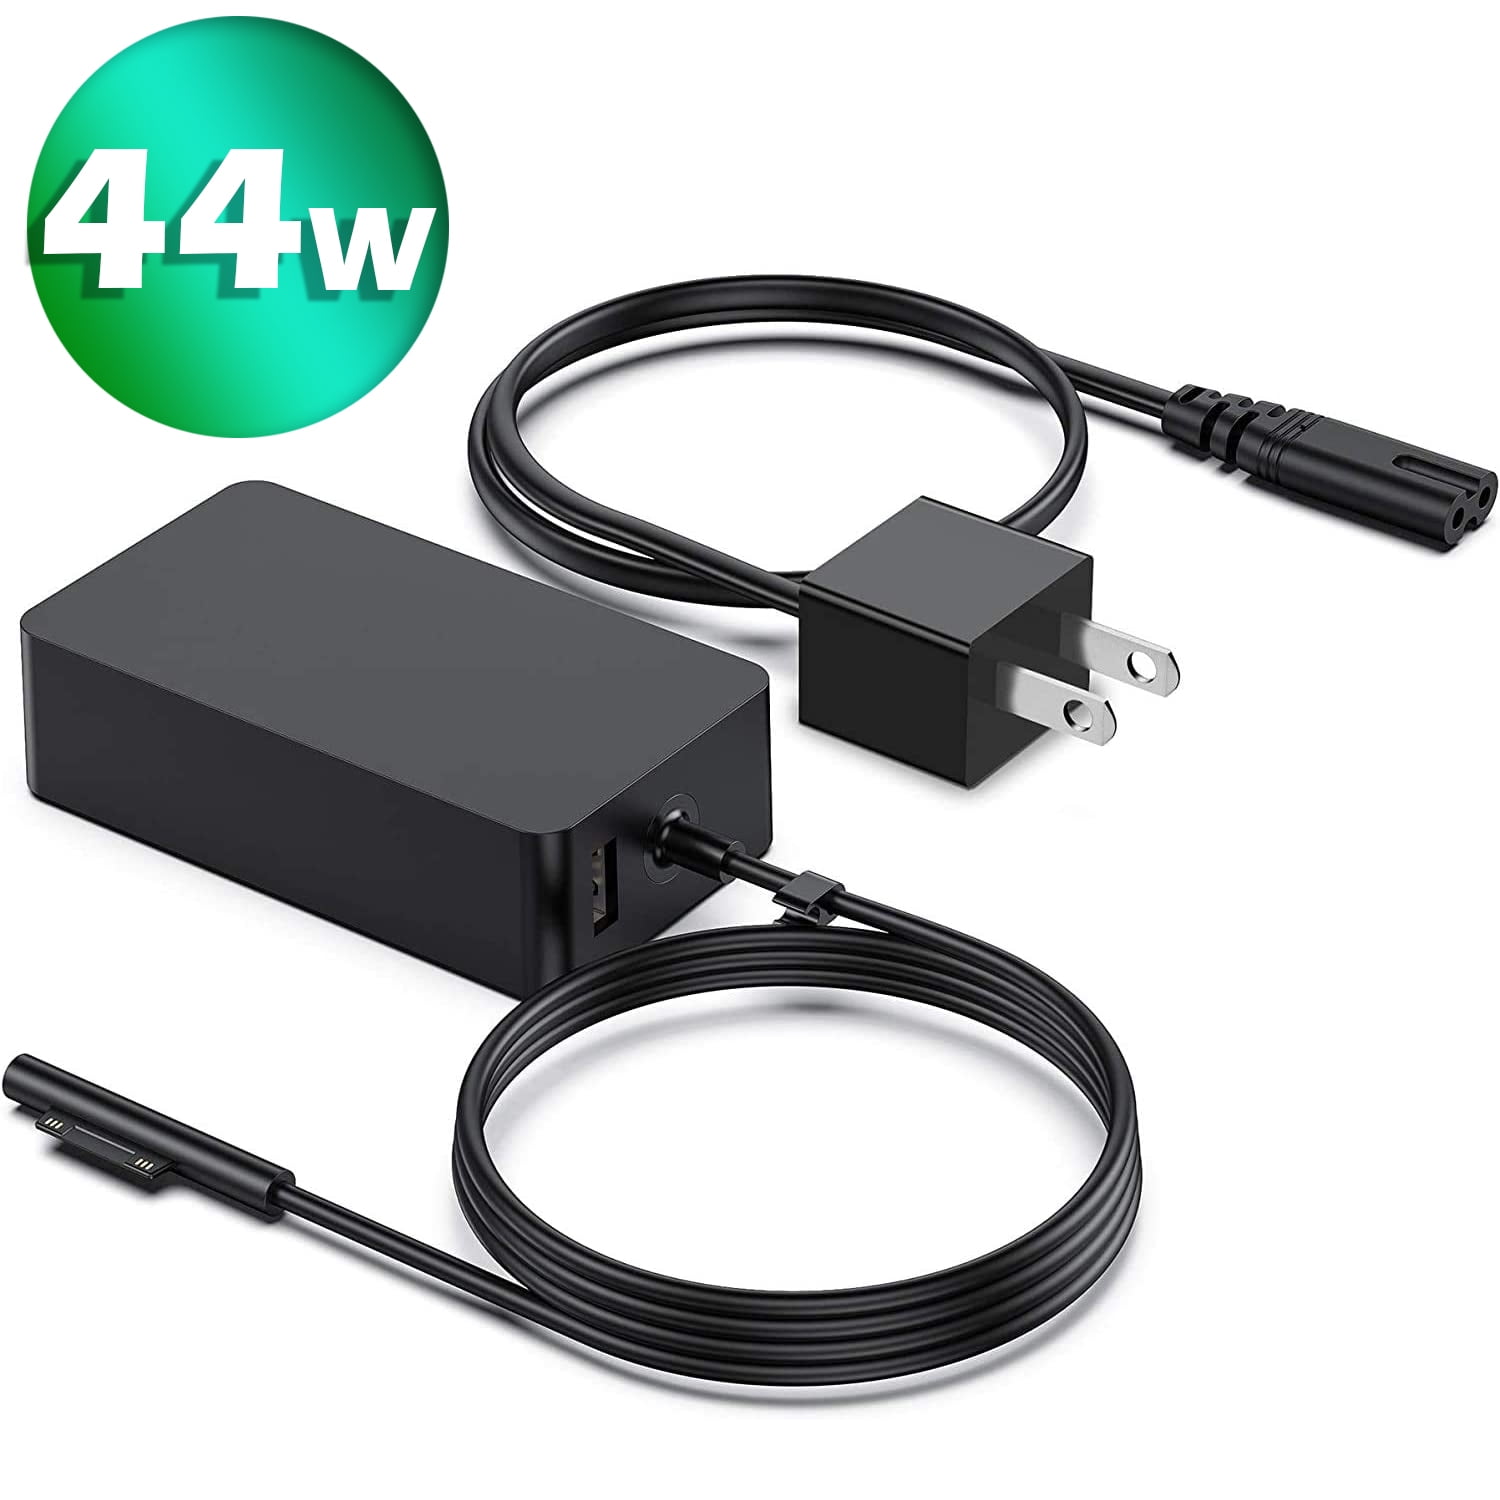 Surface Pro Charger Surface Book & Surface Go 44W 15V 2.58A Surface Power Supply for Micro-Soft Surface Pro 3/4/5/6 Surface Laptop 1/2 Ebeylo Micro-Soft Surface Charger 